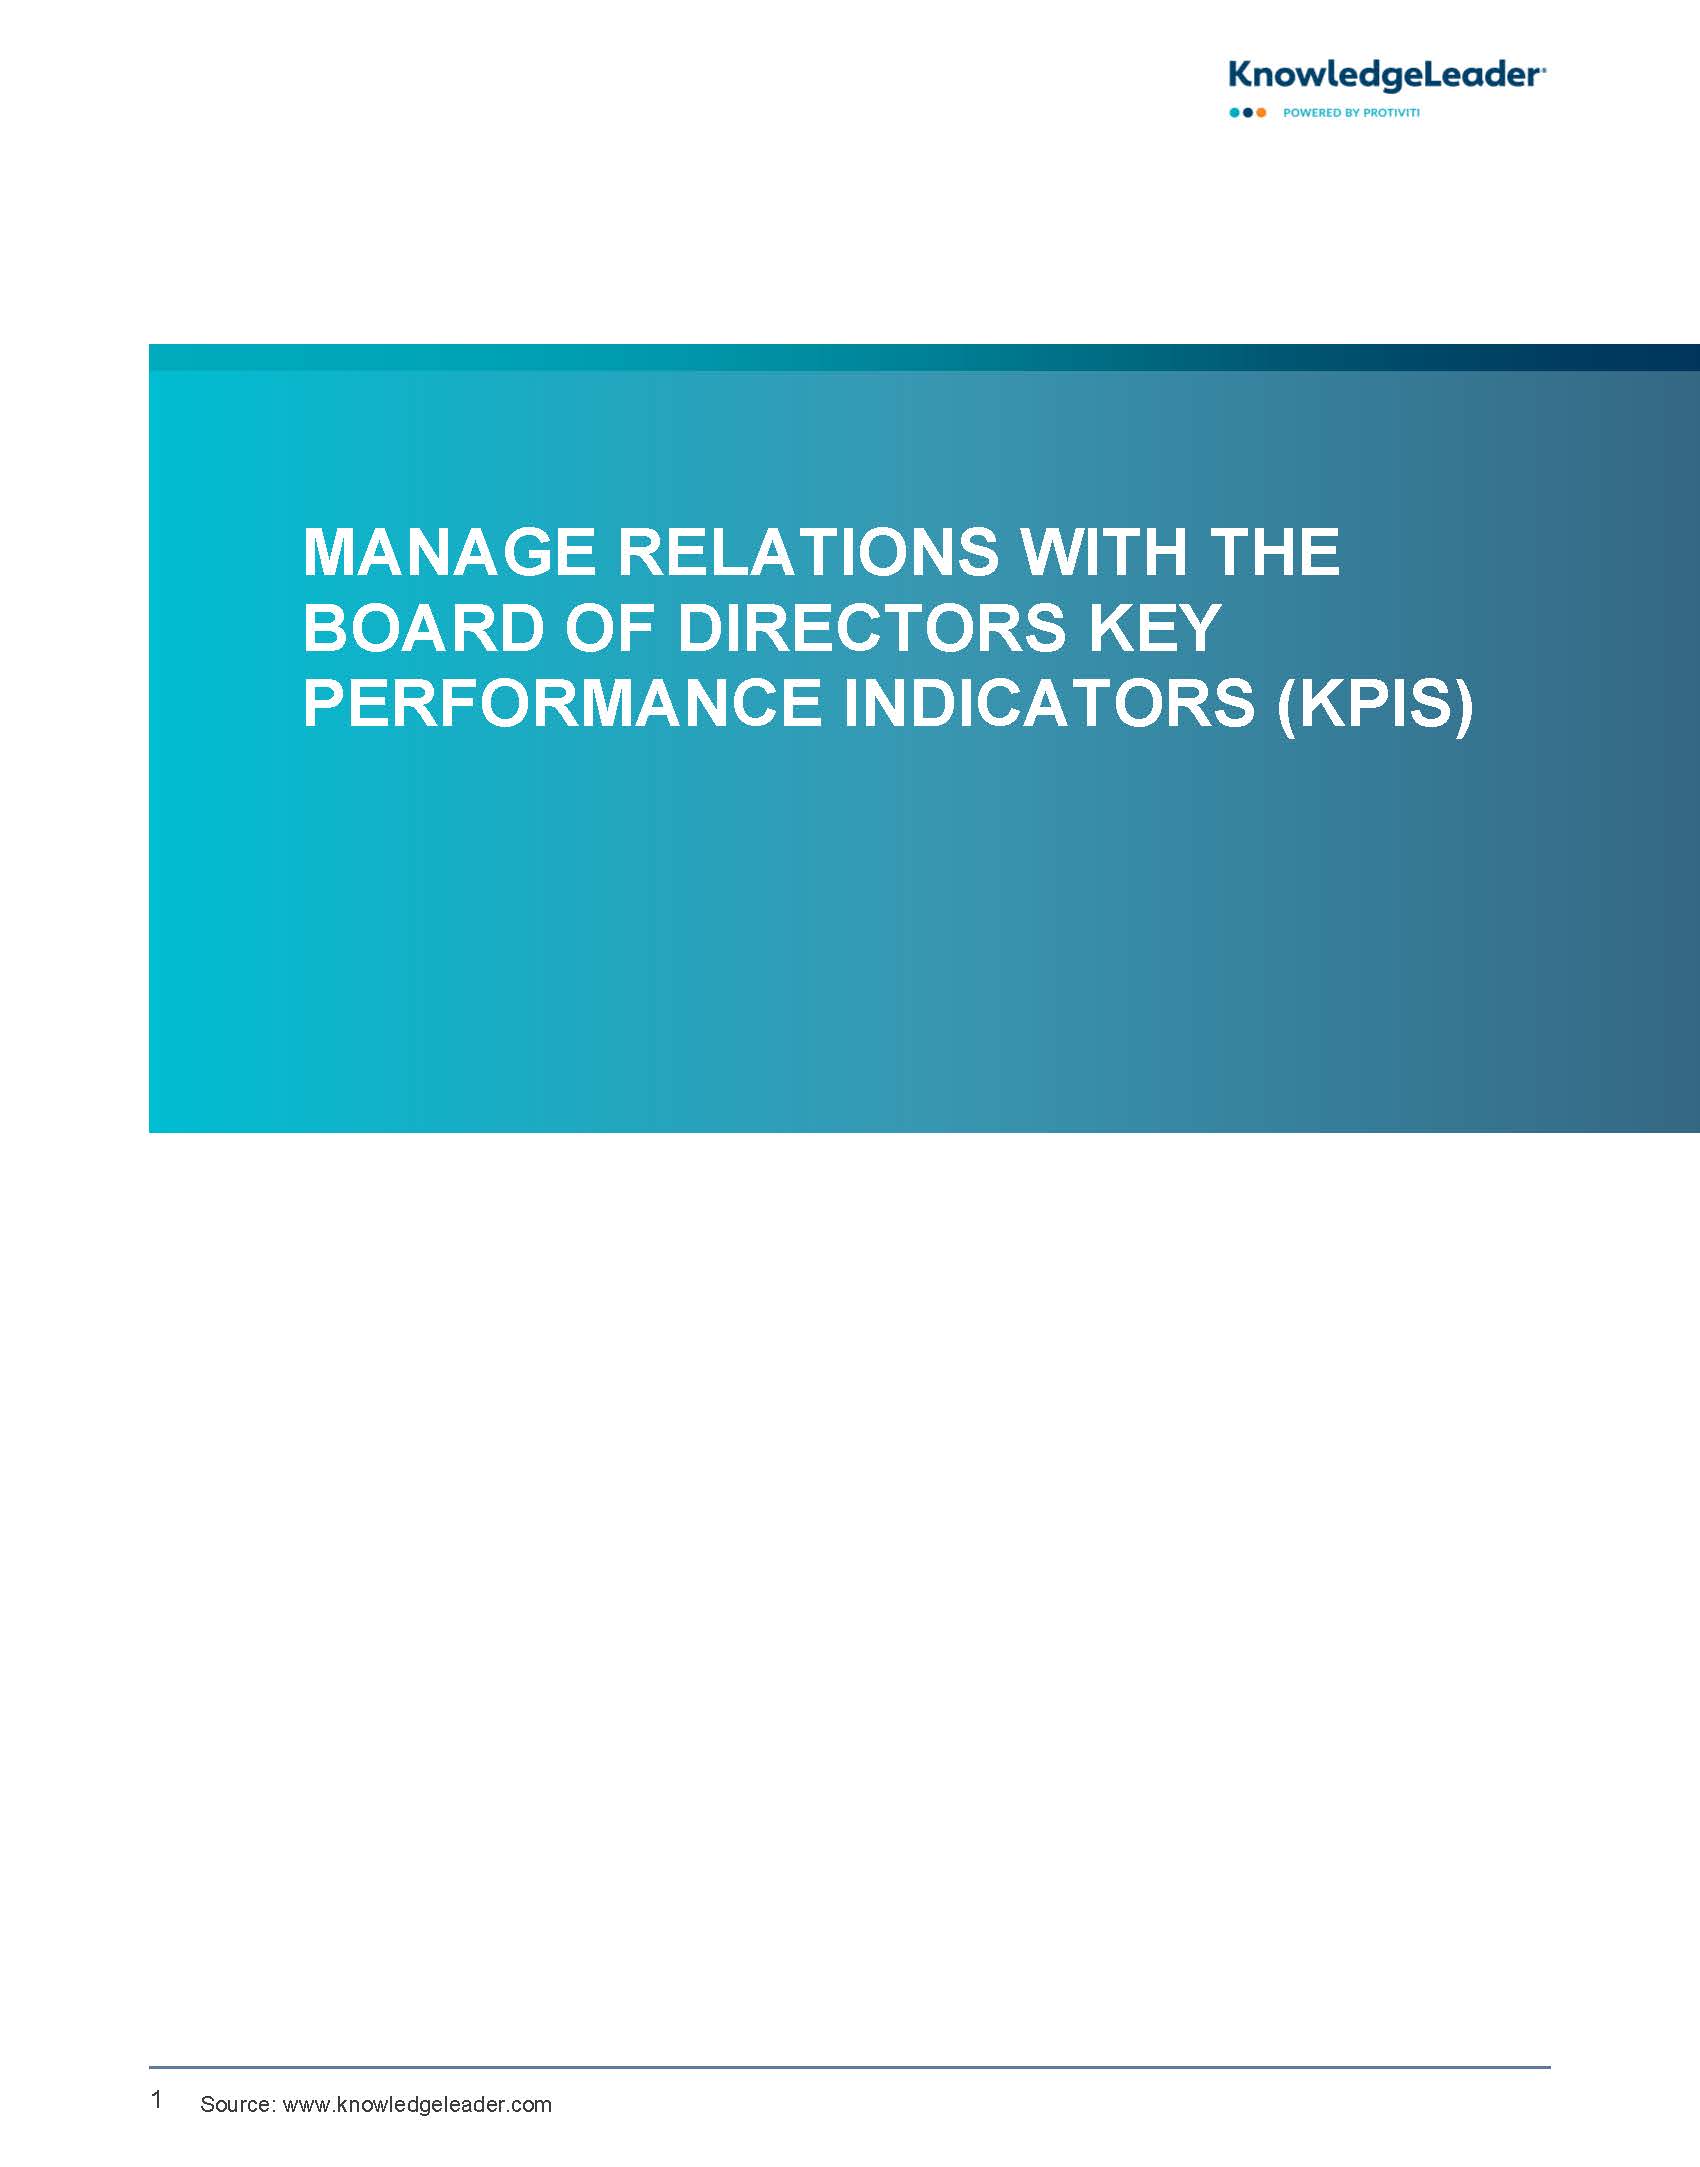 Screenshot of the first page of Manage Relations With the Board of Directors Key Performance Indicators (KPIs)